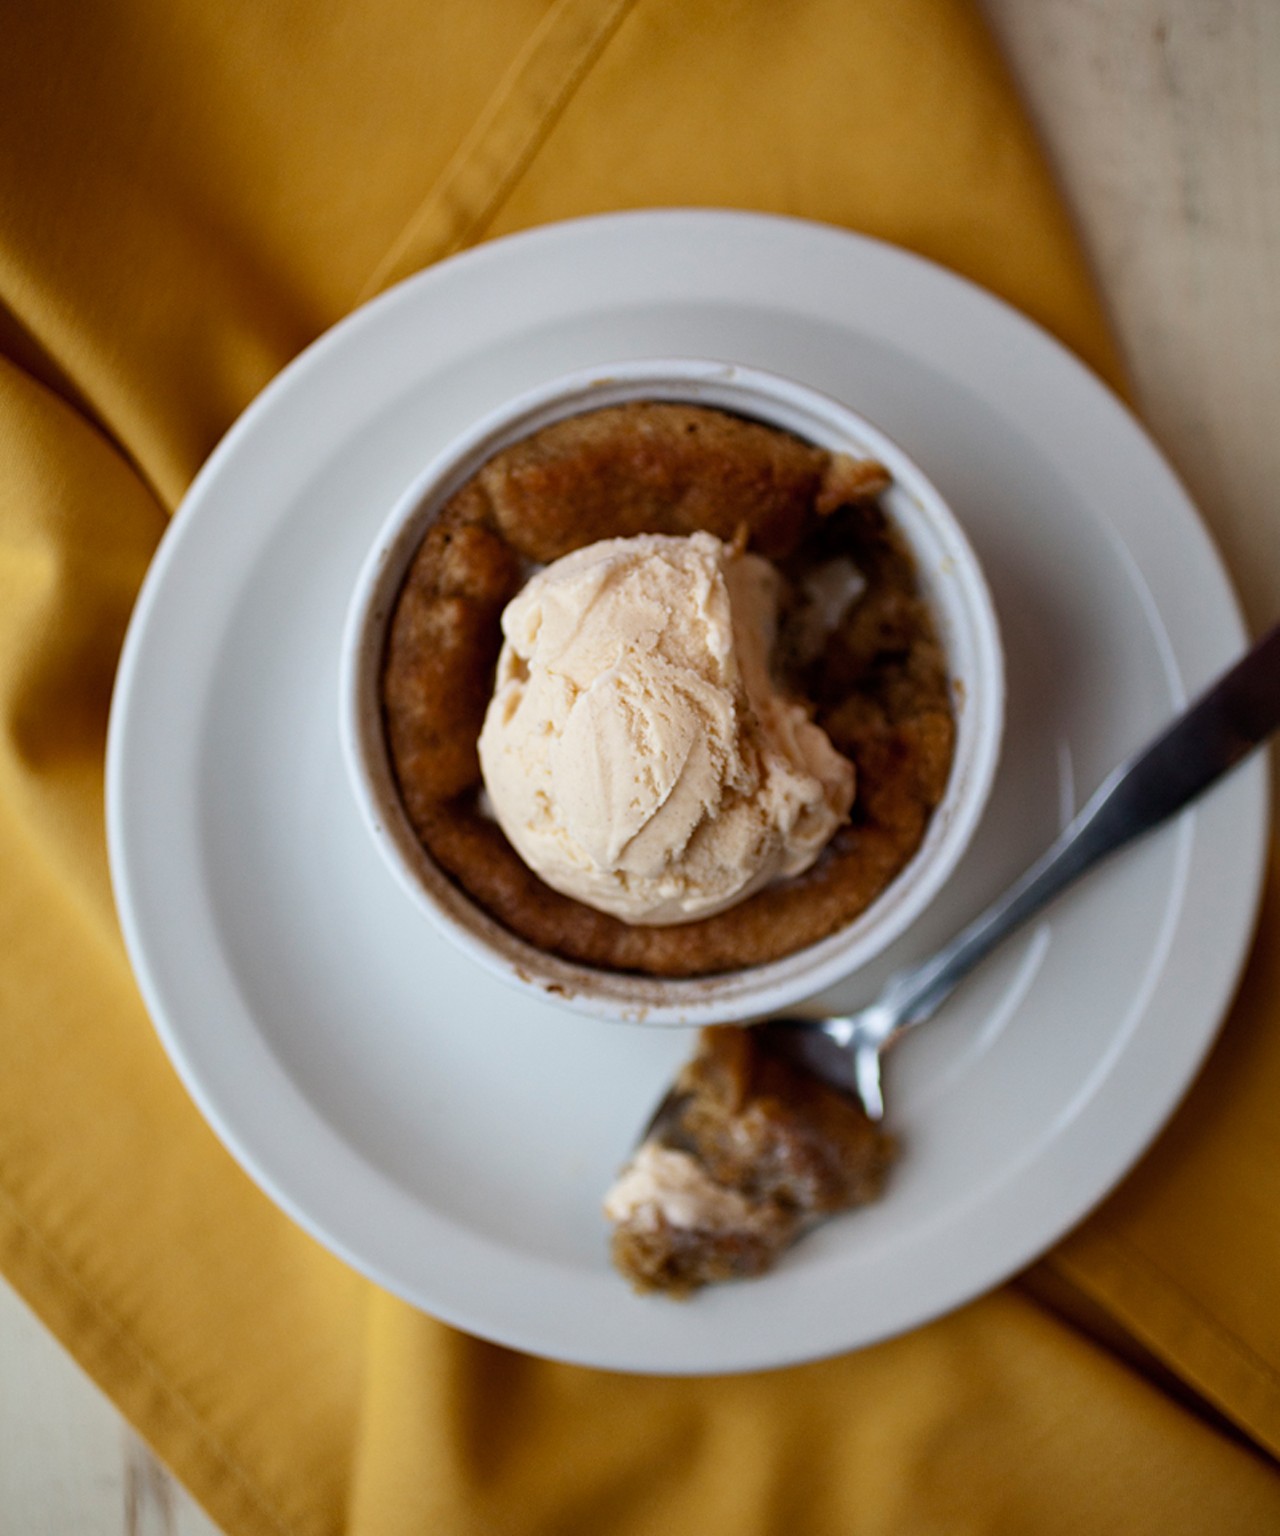 A dessert special -- the "Deep Dish Doodle" with cinnamon ice cream.